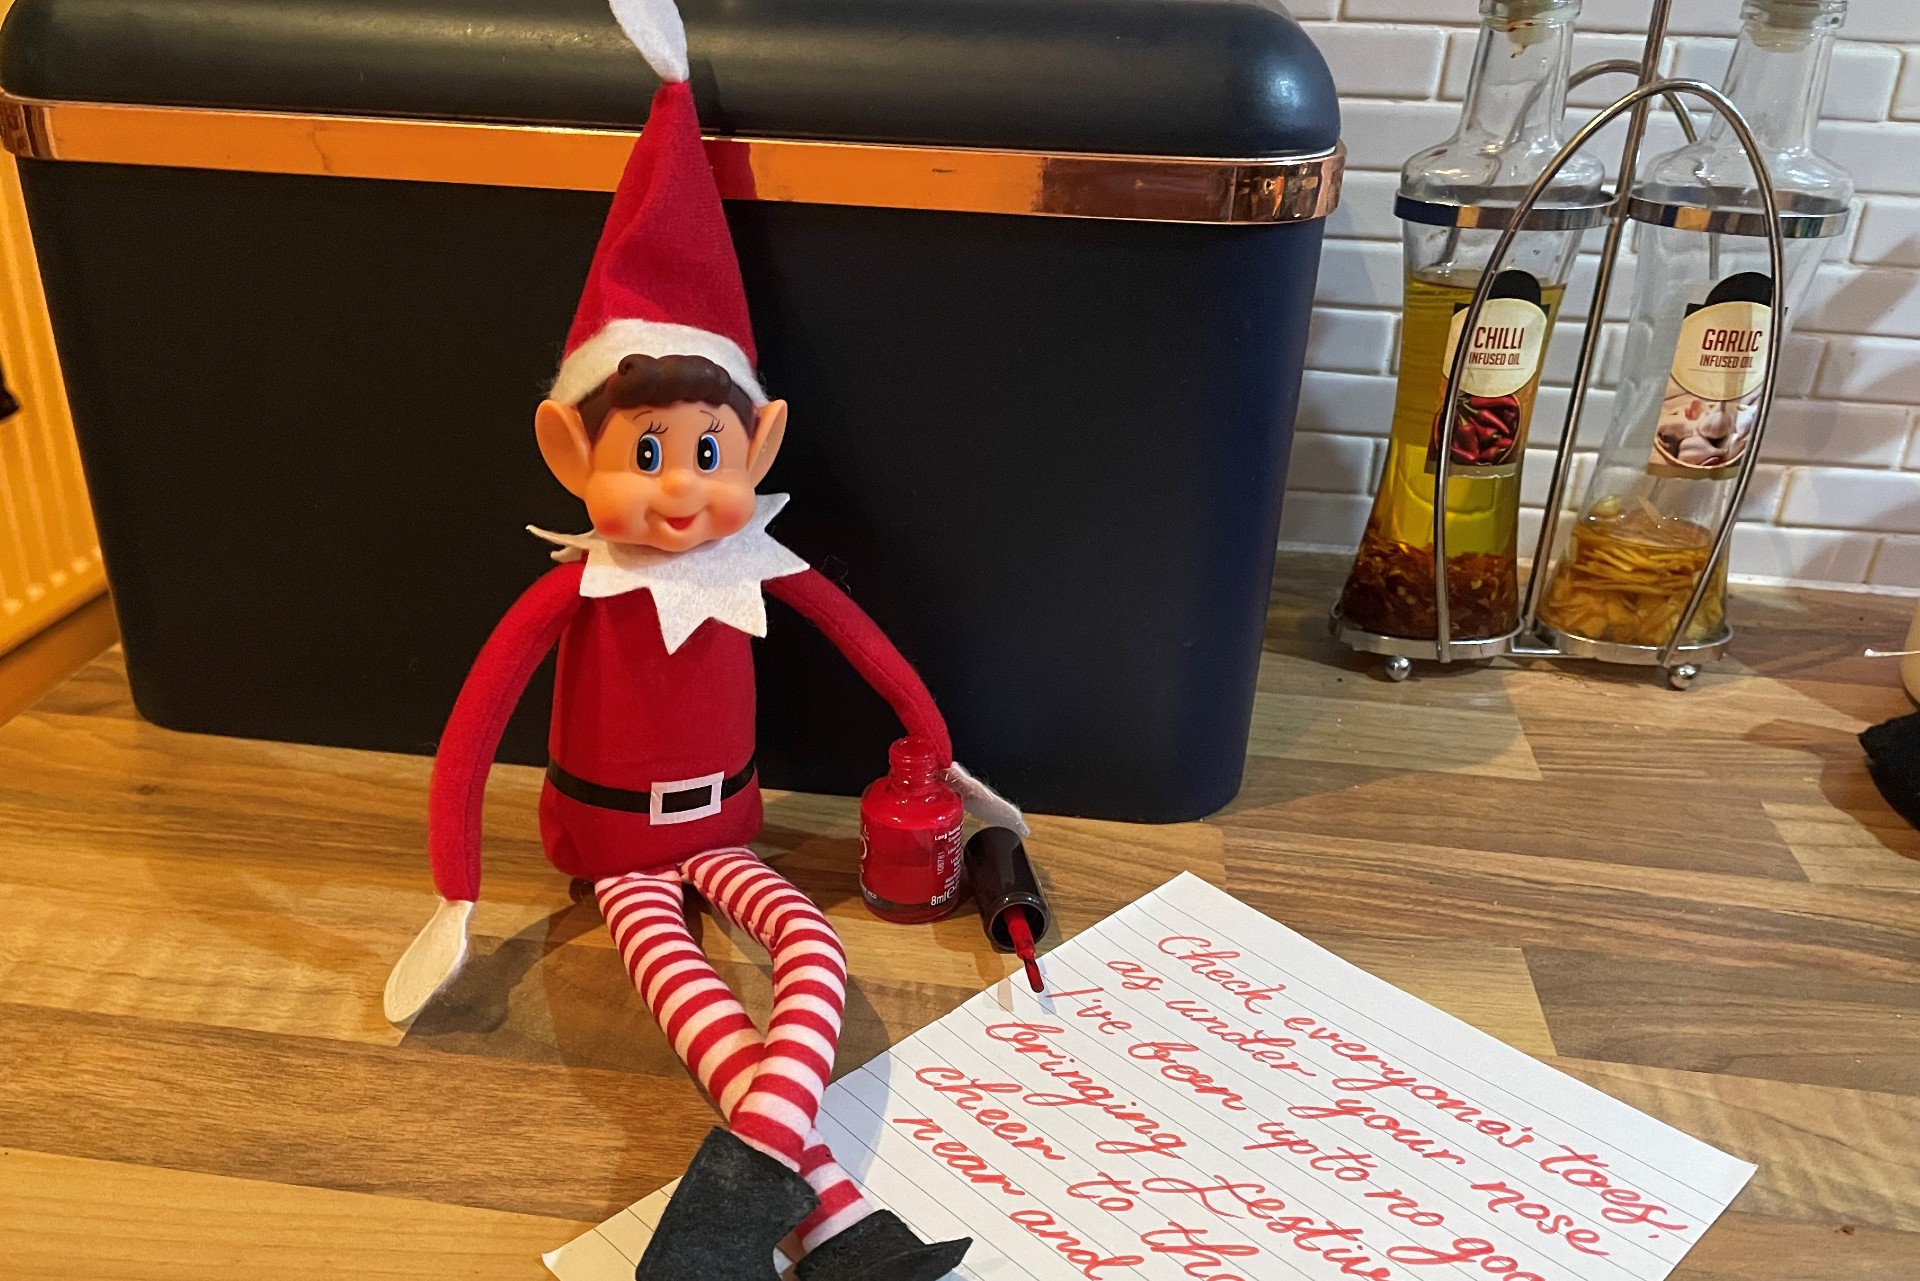 An elf on the shelf sat with a note and an open bottle of red nail varnish